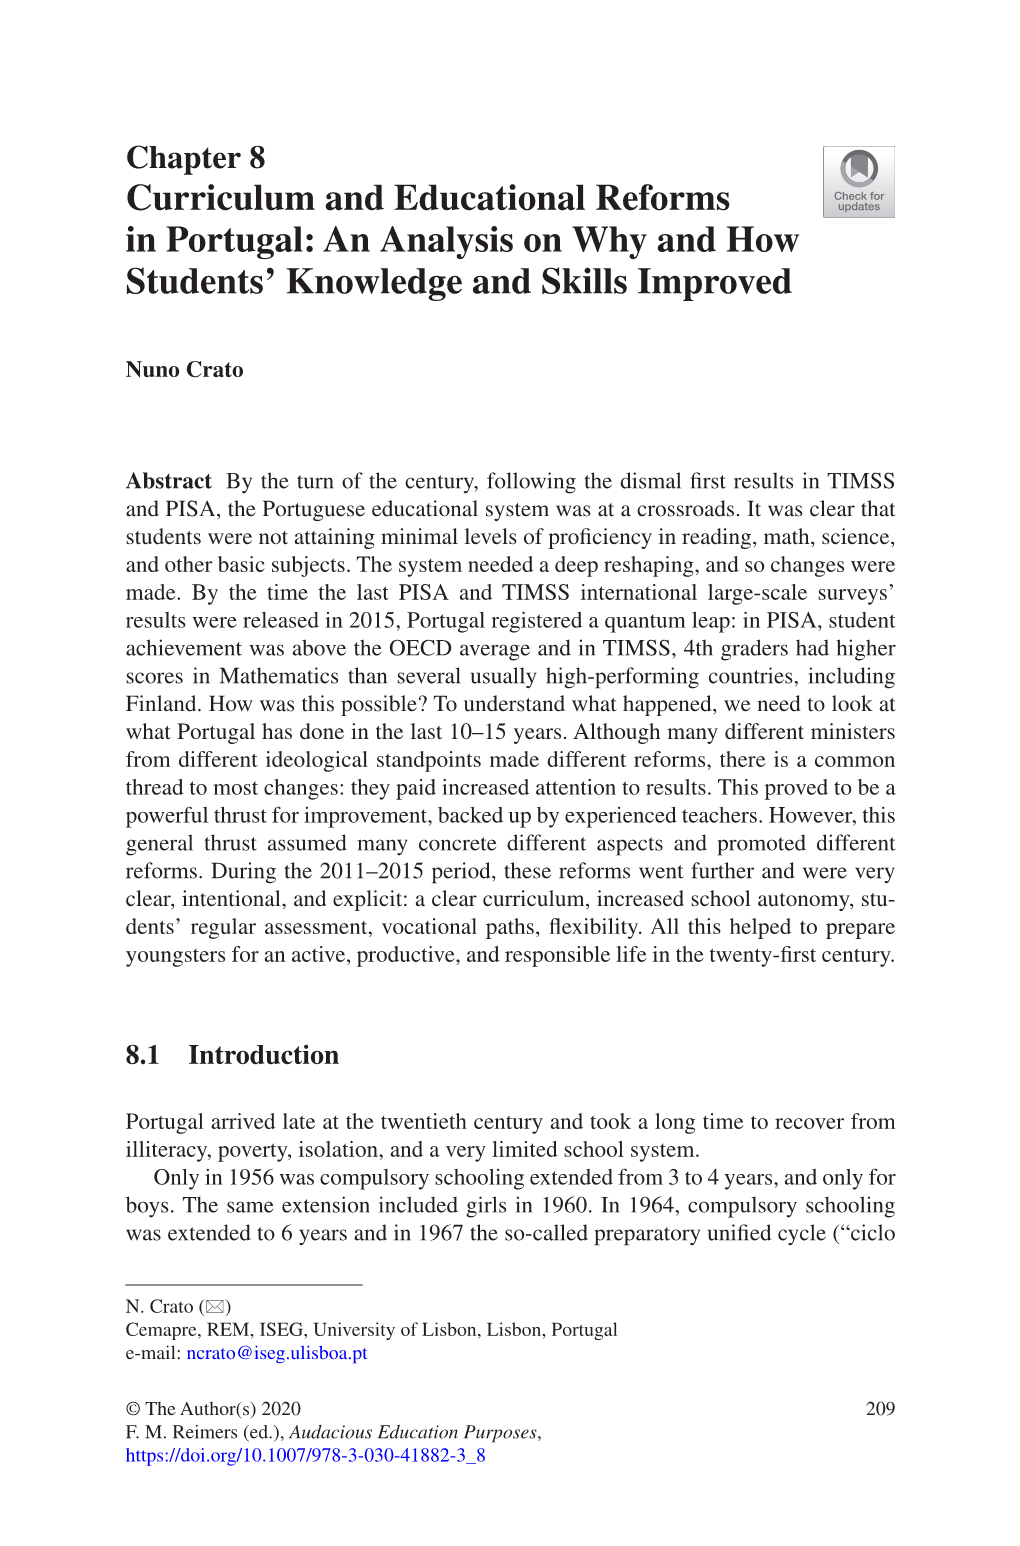 Curriculum and Educational Reforms in Portugal: an Analysis on Why and How Students' Knowledge and Skills Improved